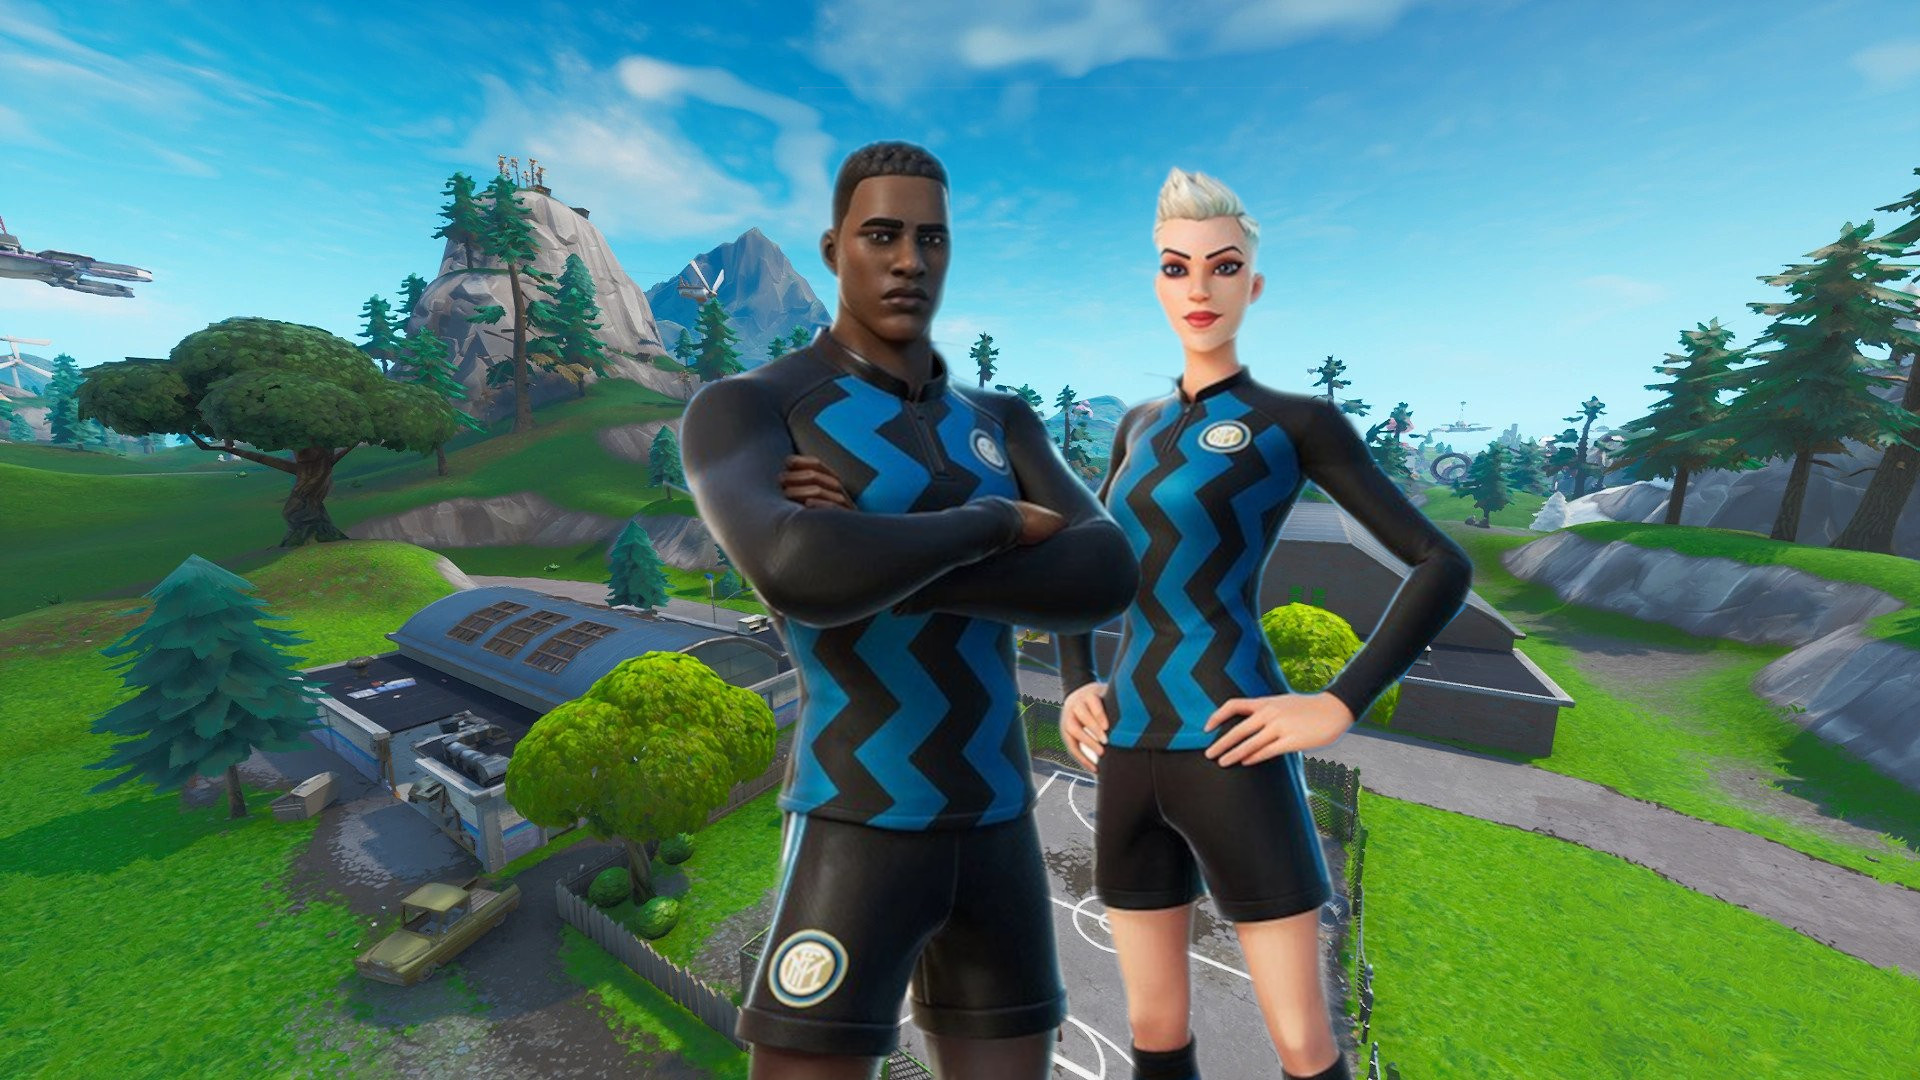 Fortnite football event is on the way according to leaks